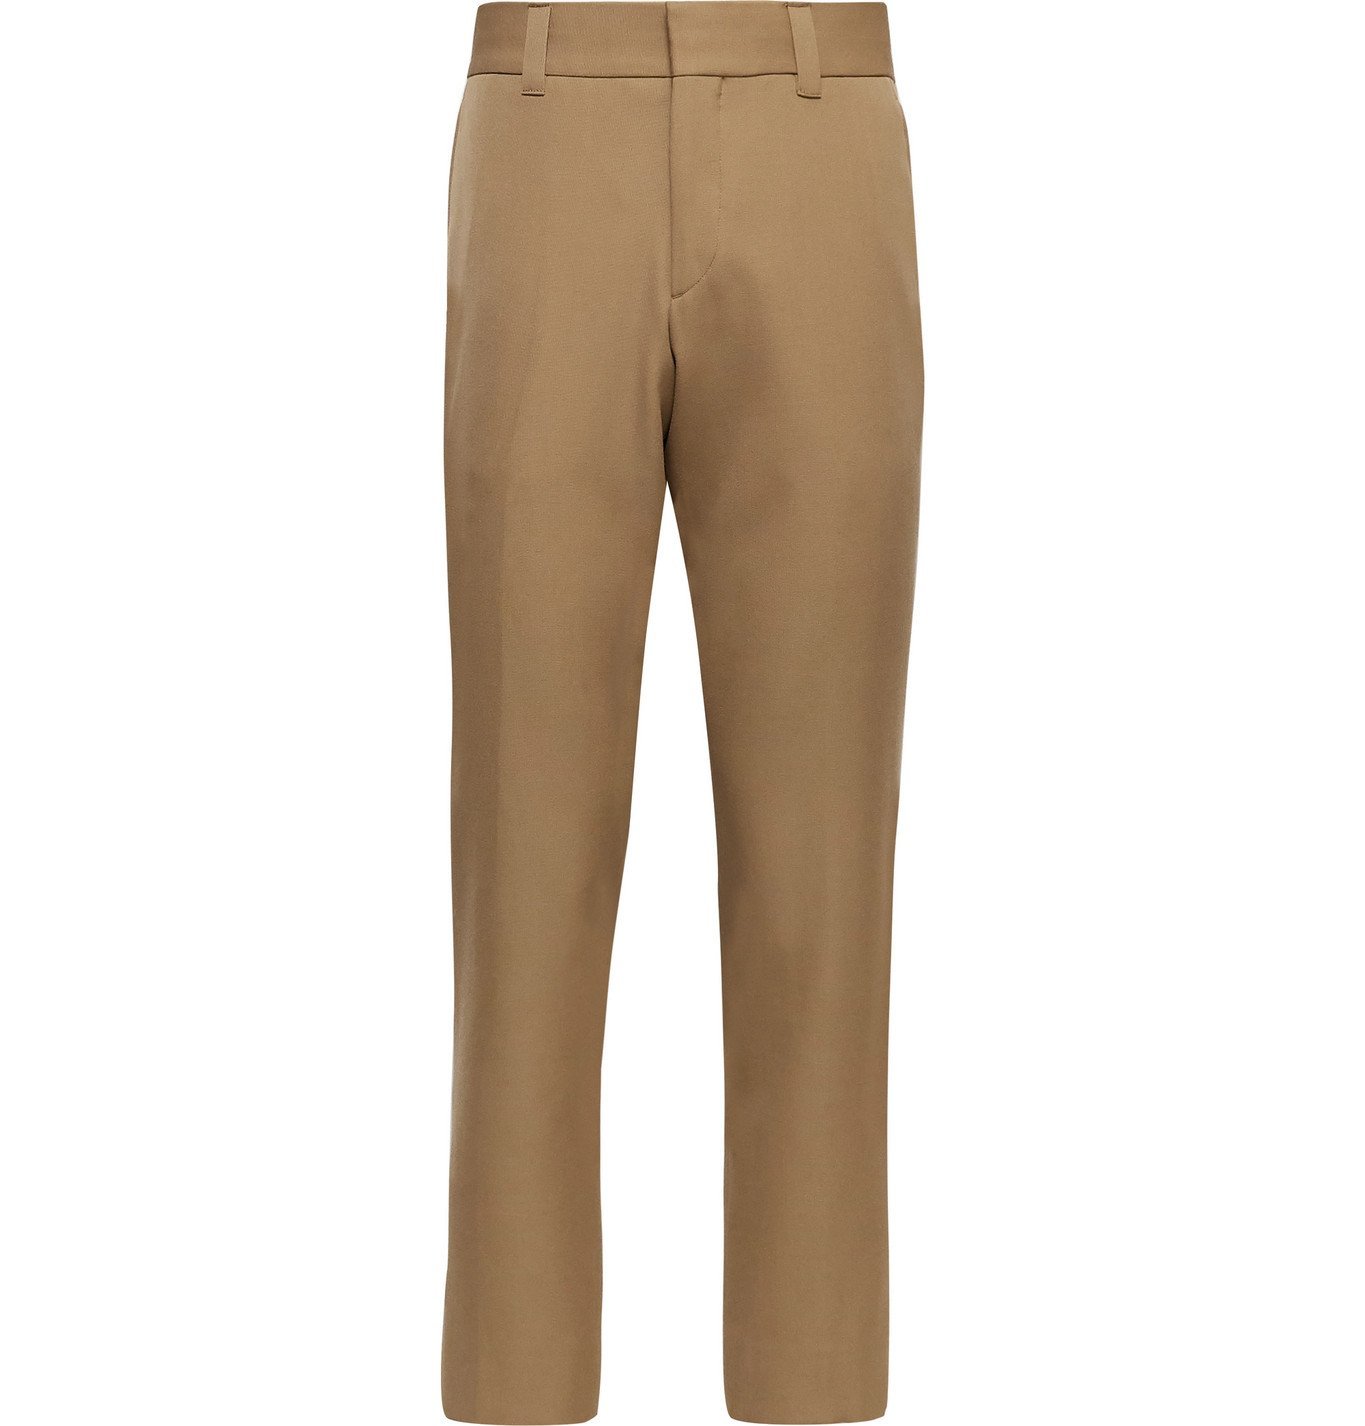 Burberry - Slim-Fit Tapered Wool Trousers - Brown Burberry